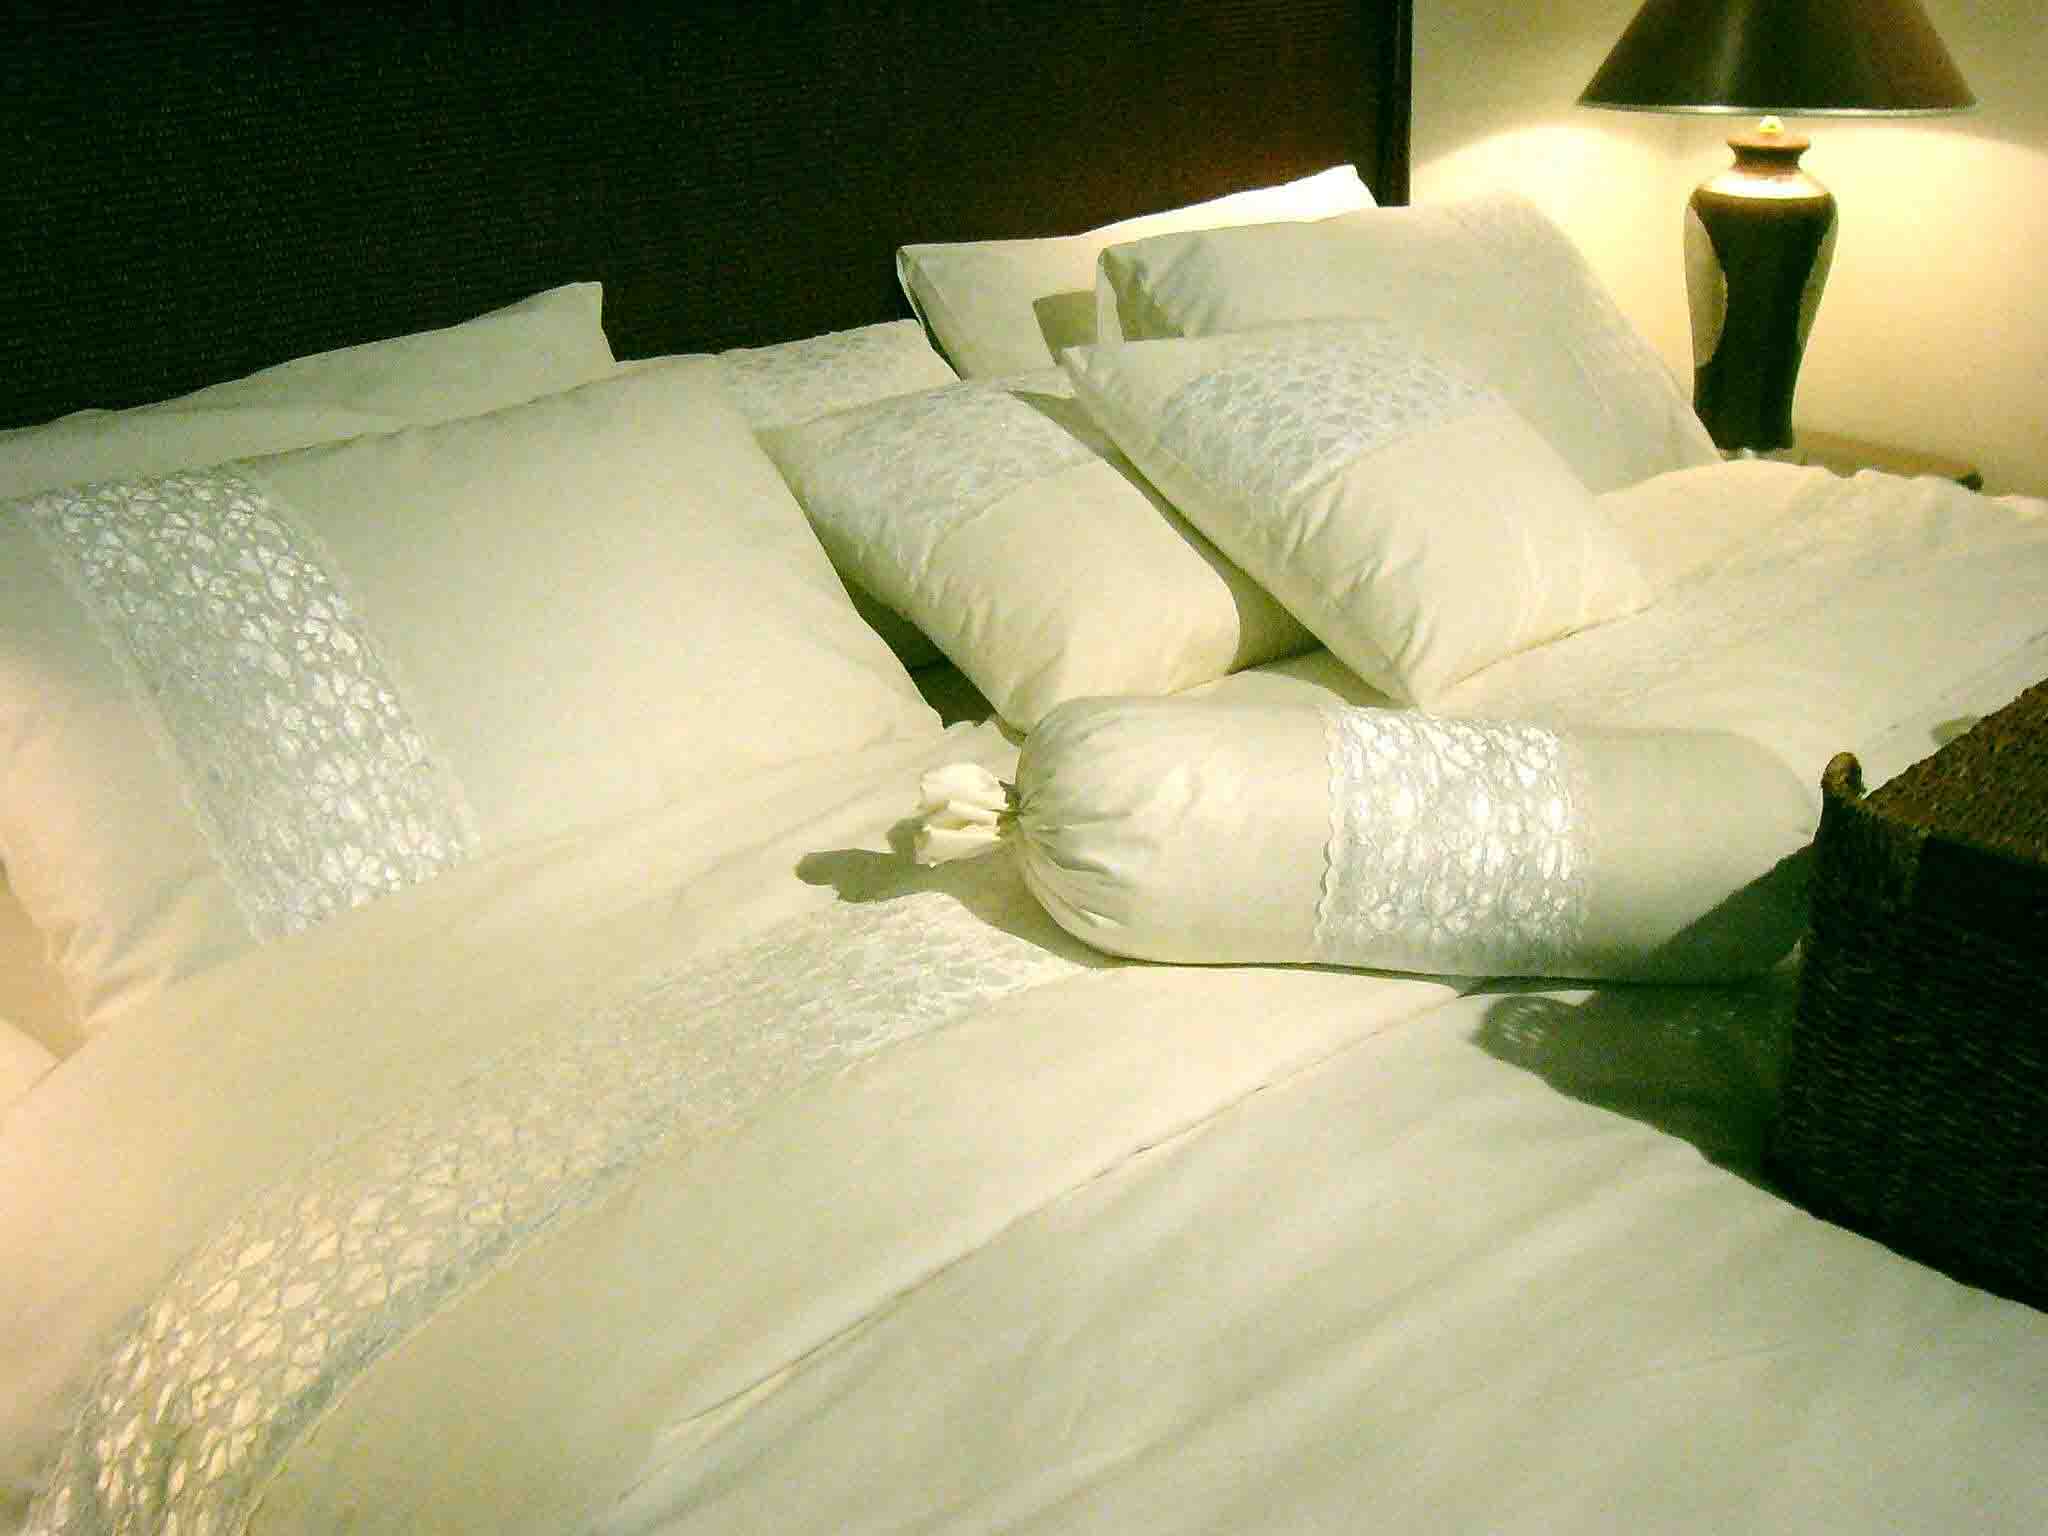 http://img.alibaba.com/photo/11424113/Combination_Of_Lace_Bedding__Bedspread___Comforter_Sets_.jpg